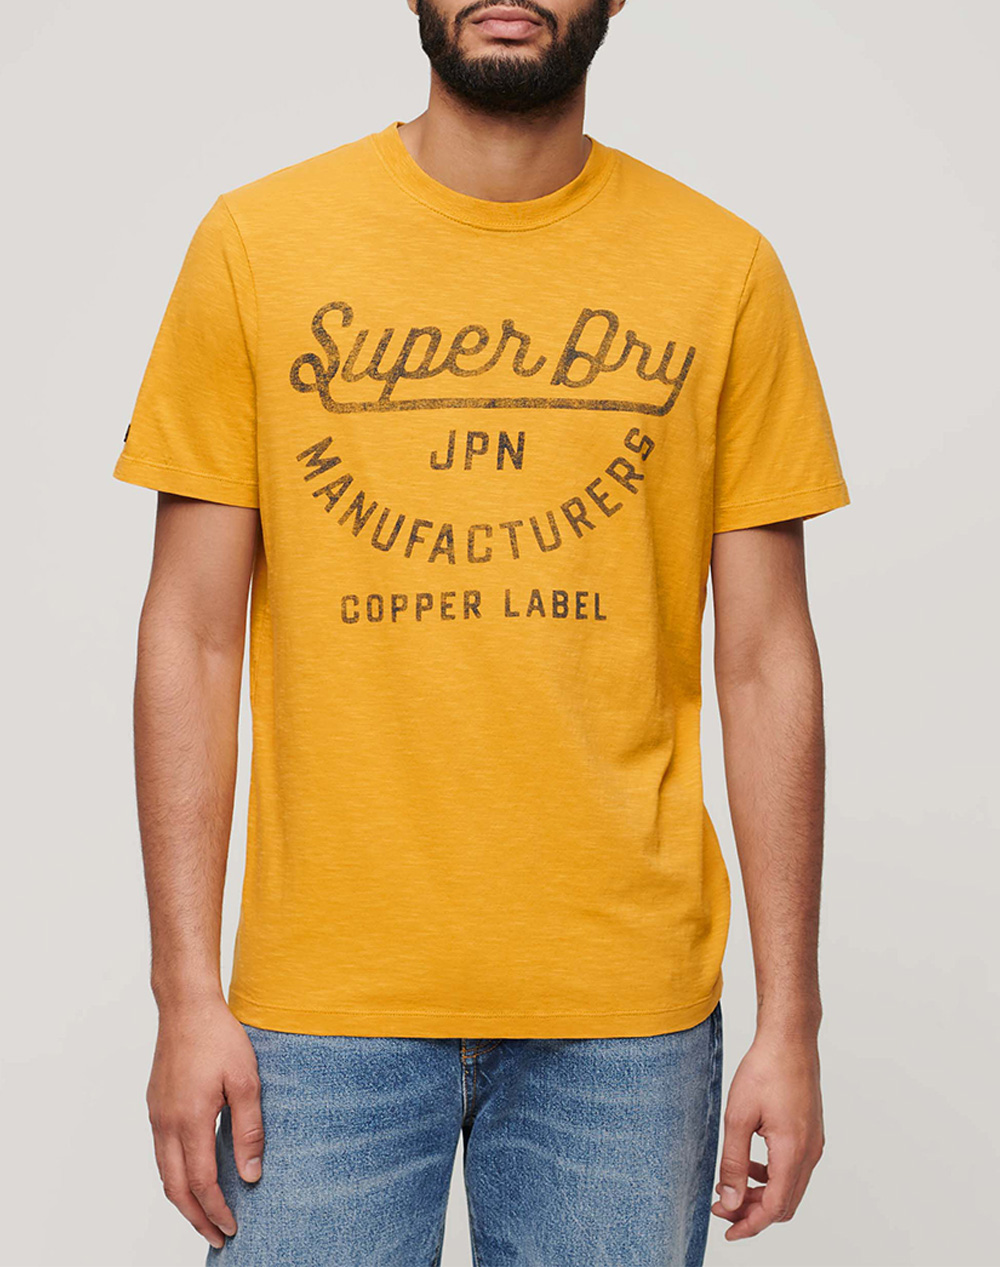 SUPERDRY D2 OVIN COPPER LABEL SCRIPT TEE ΜΠΛΟΥΖΑ ΑΝΔΡΙΚΟ M1011905A-2AO Yellow